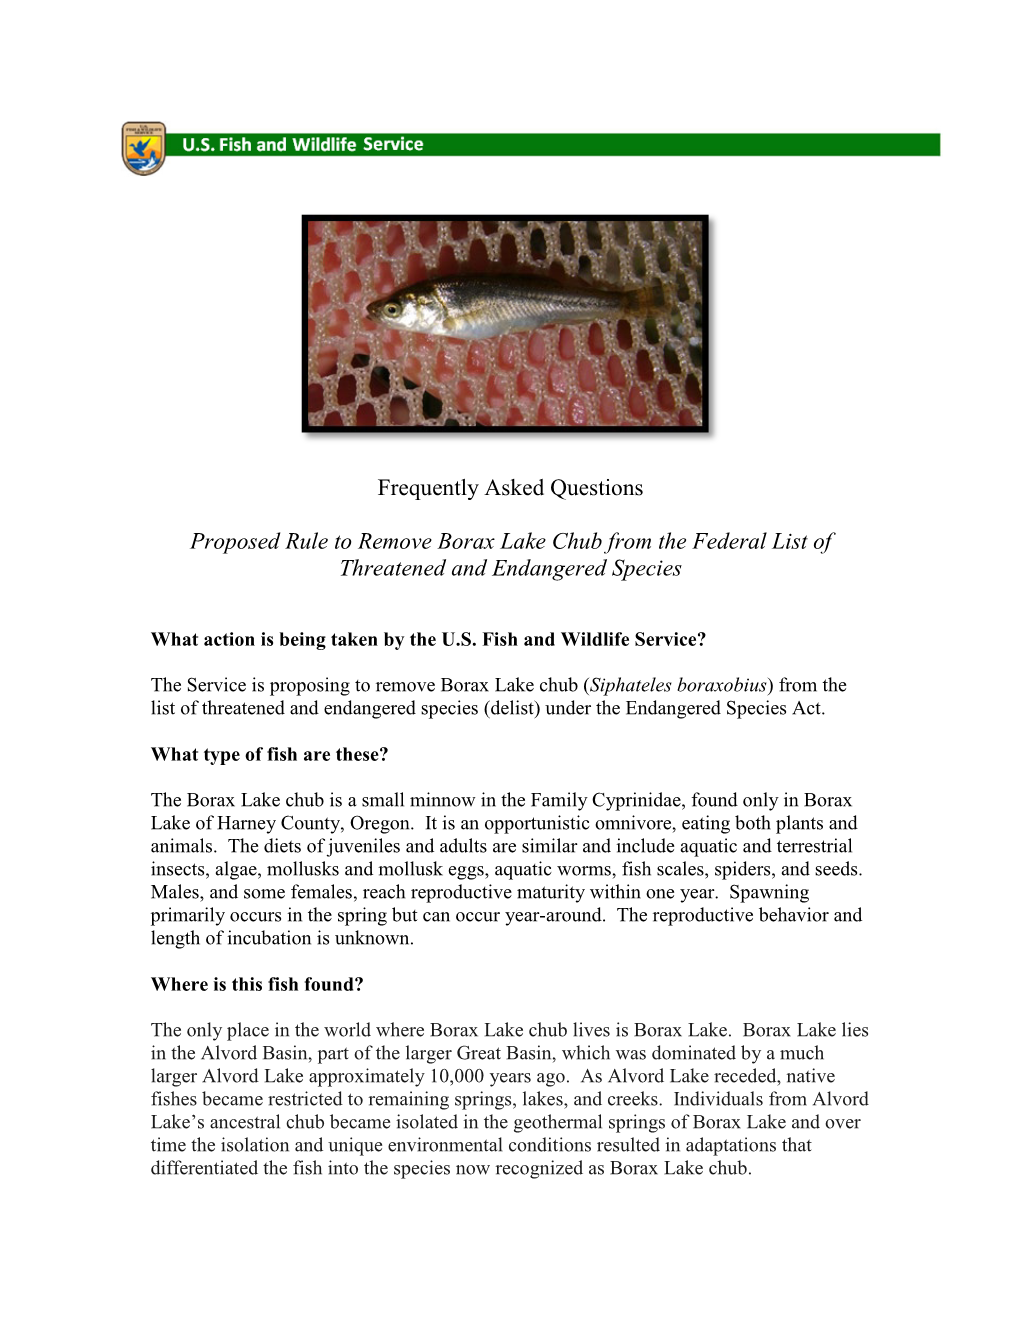 Frequently Asked Questions Proposed Rule to Remove Borax Lake Chub from the Federal List of Threatened and Endangered Species